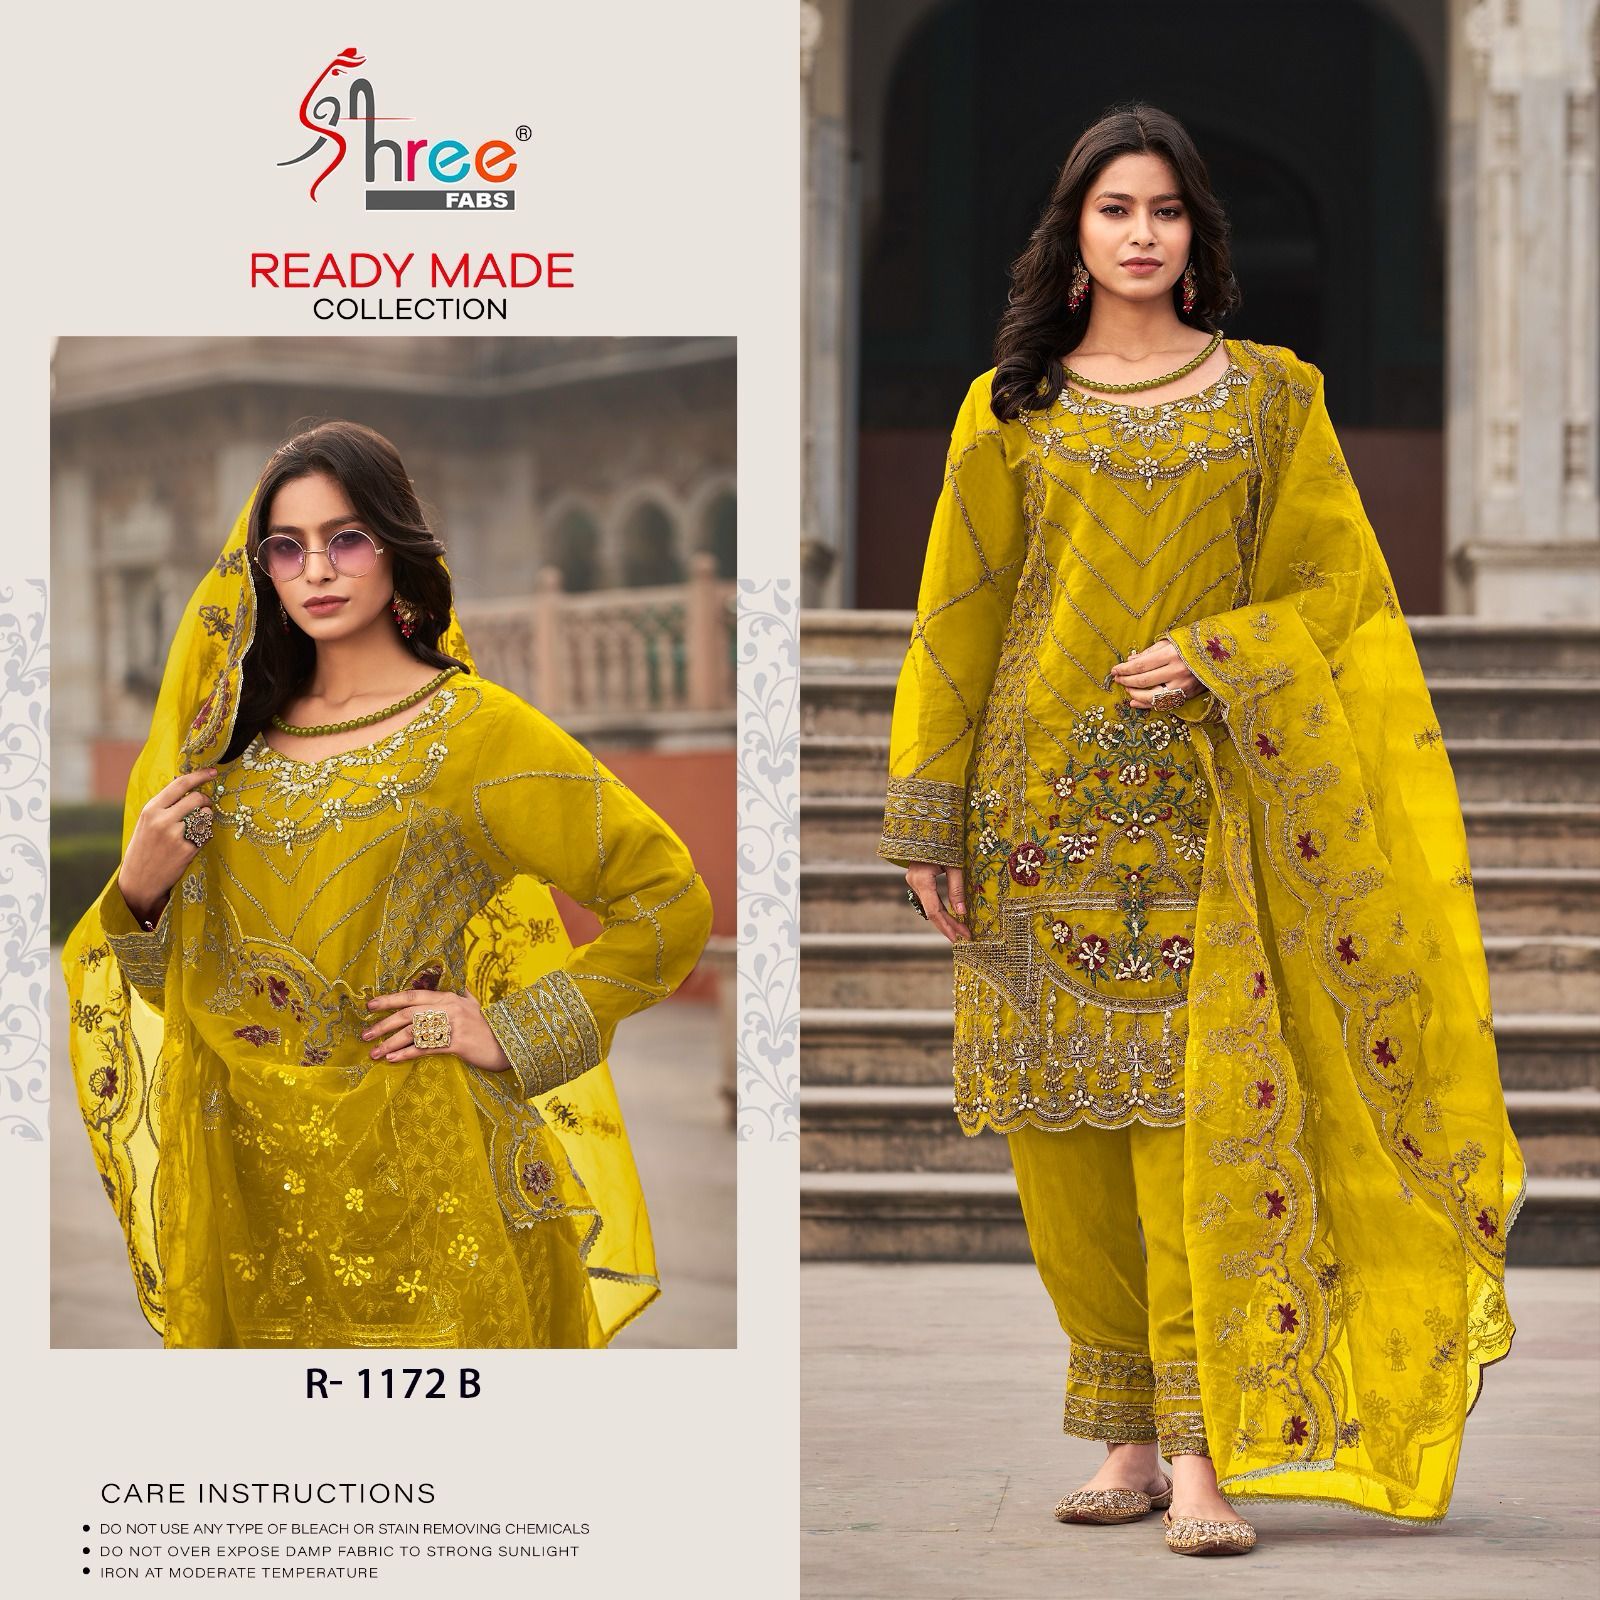 SHREE FABS SR 1172 READYMADE SUITS